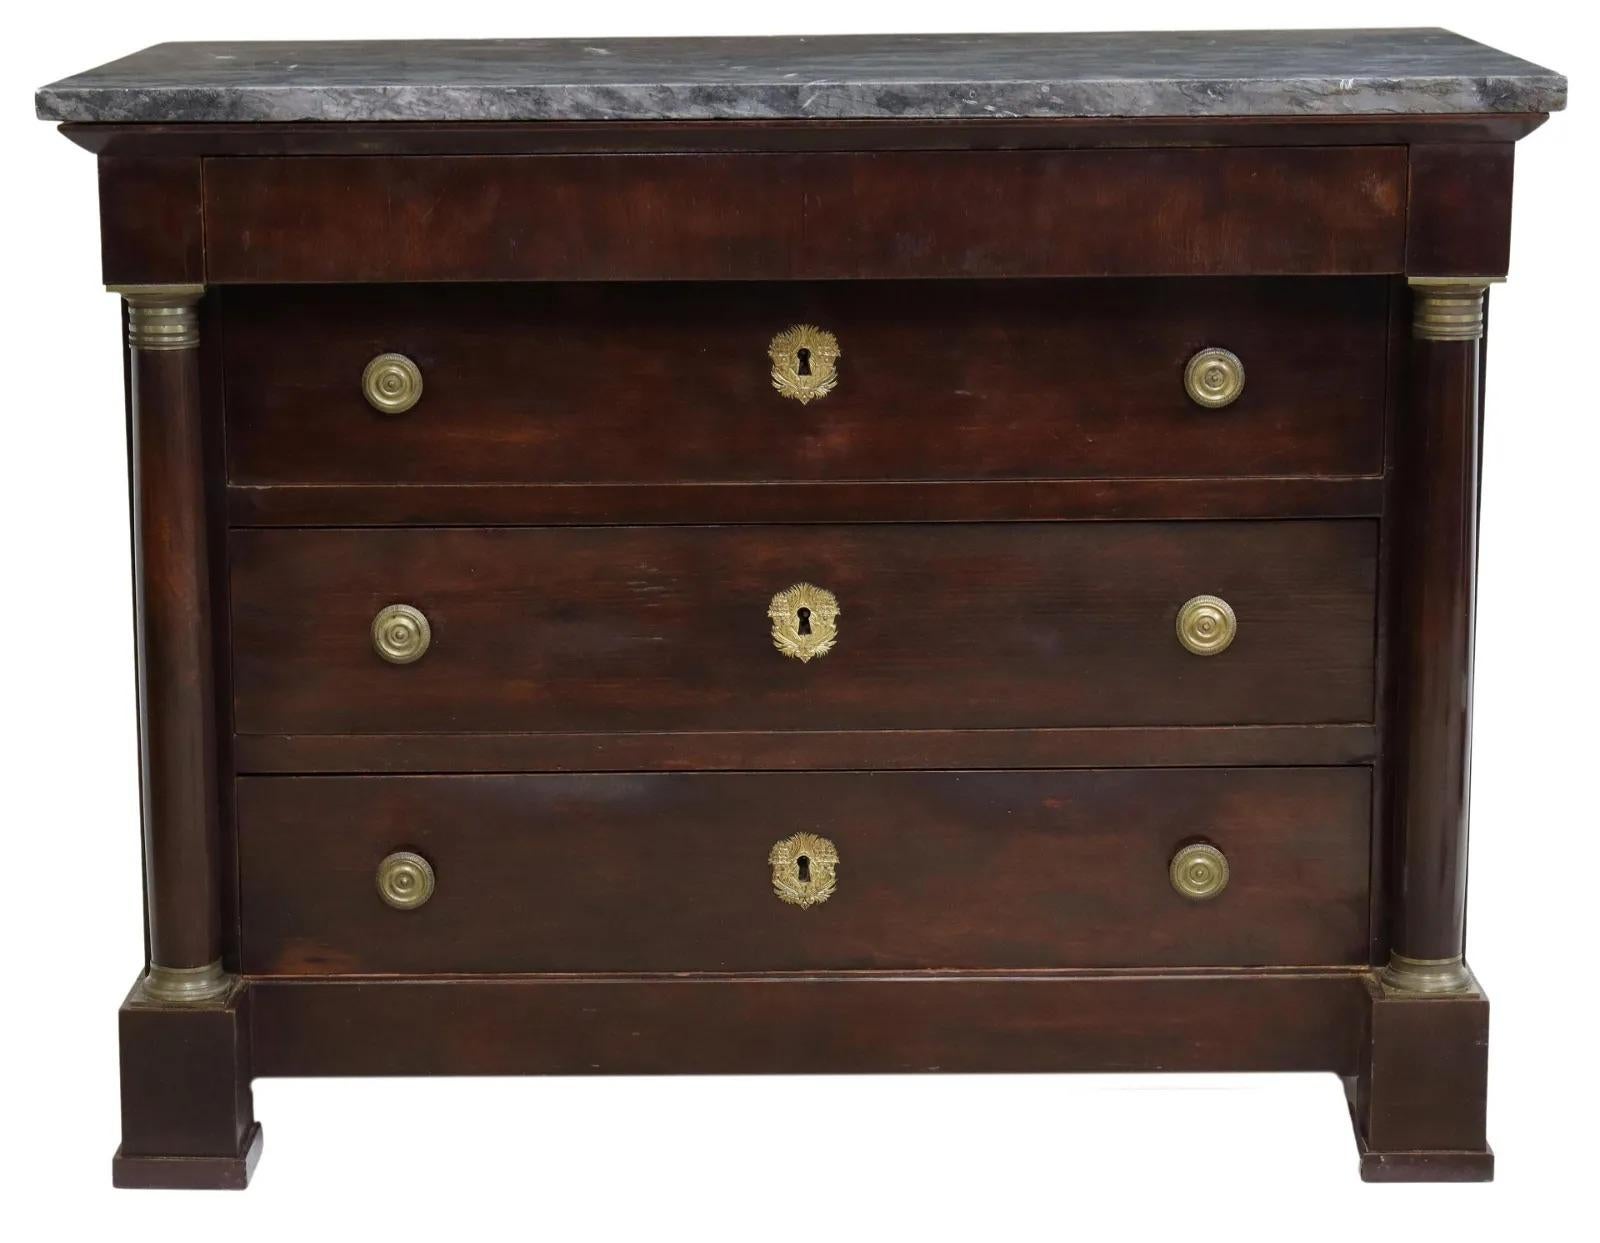 French Empire style mahogany commode, 19th c., having marble top, frieze drawer, over three additional drawers, flanked by turned columnar supports, rising on block feet.

Dimensions: approx 35